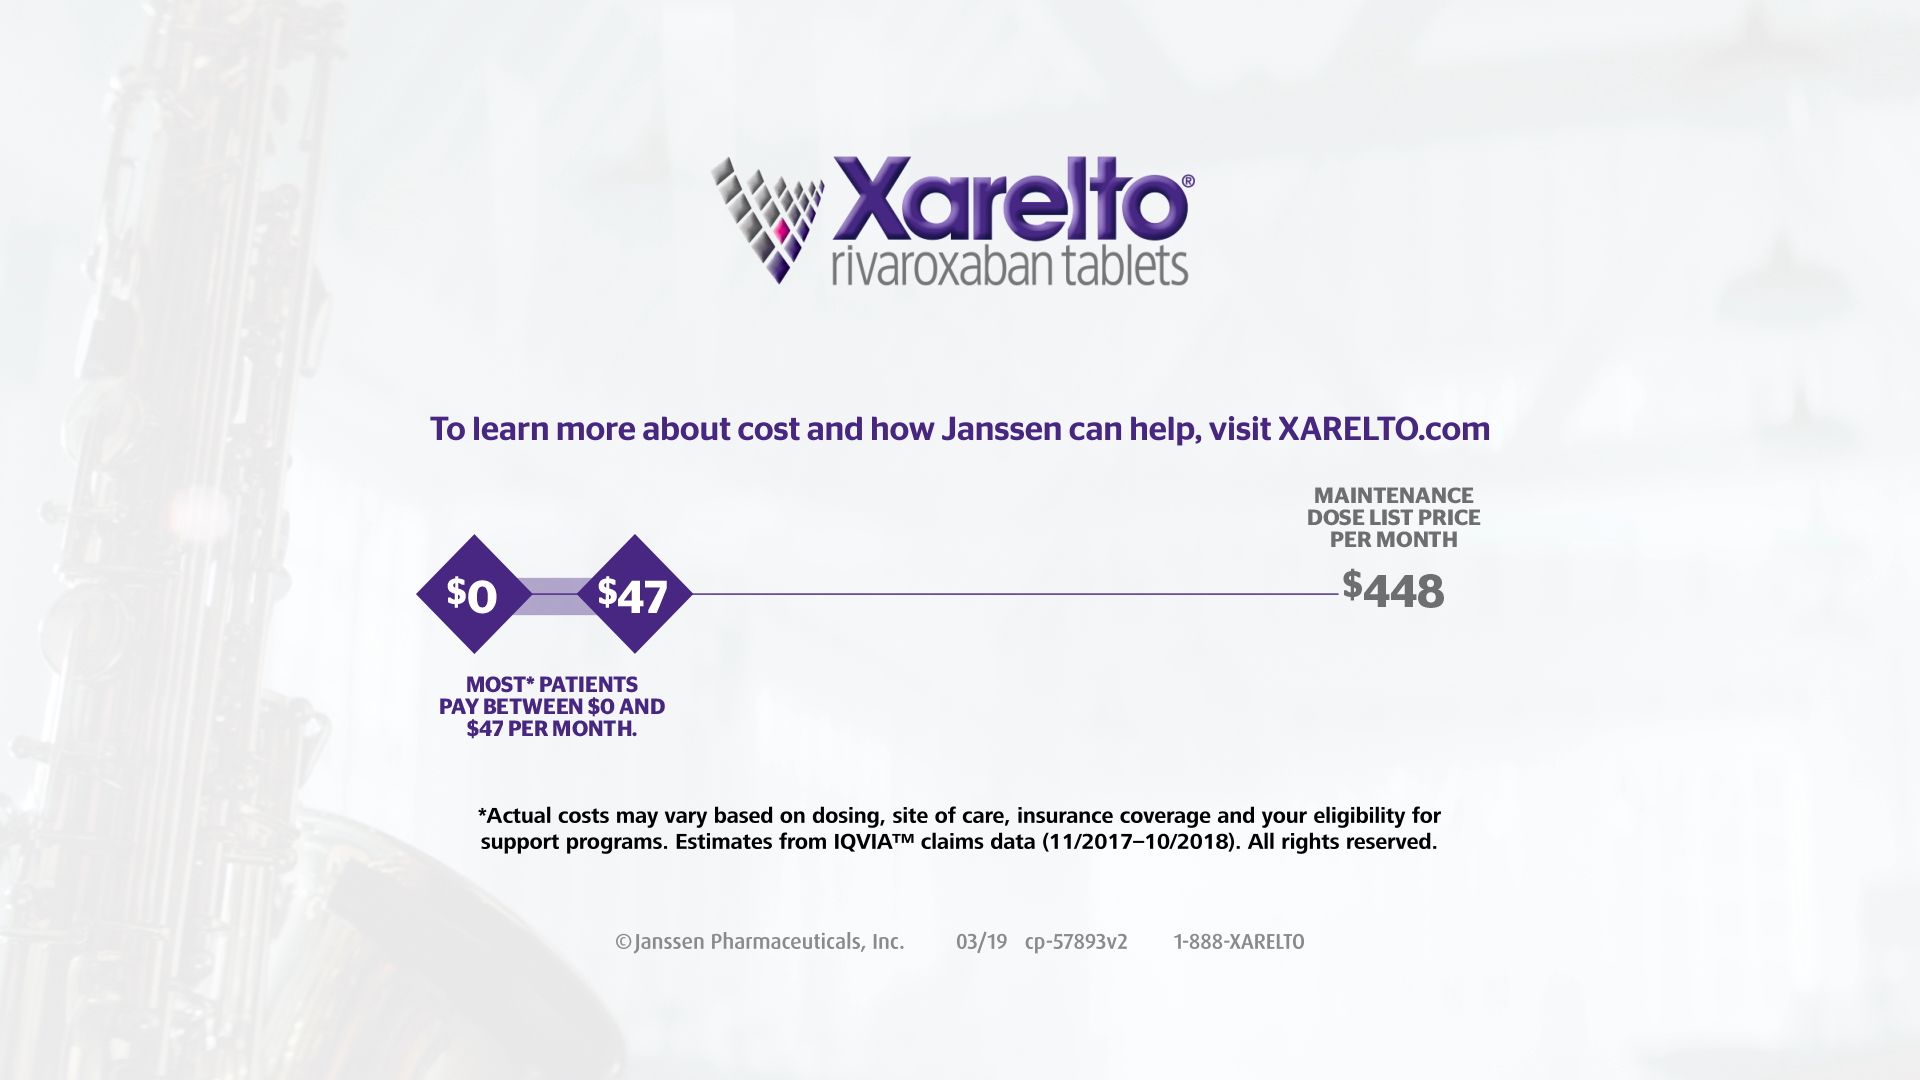 Screenshot of a new ad for Xarelto that shows the drug's price